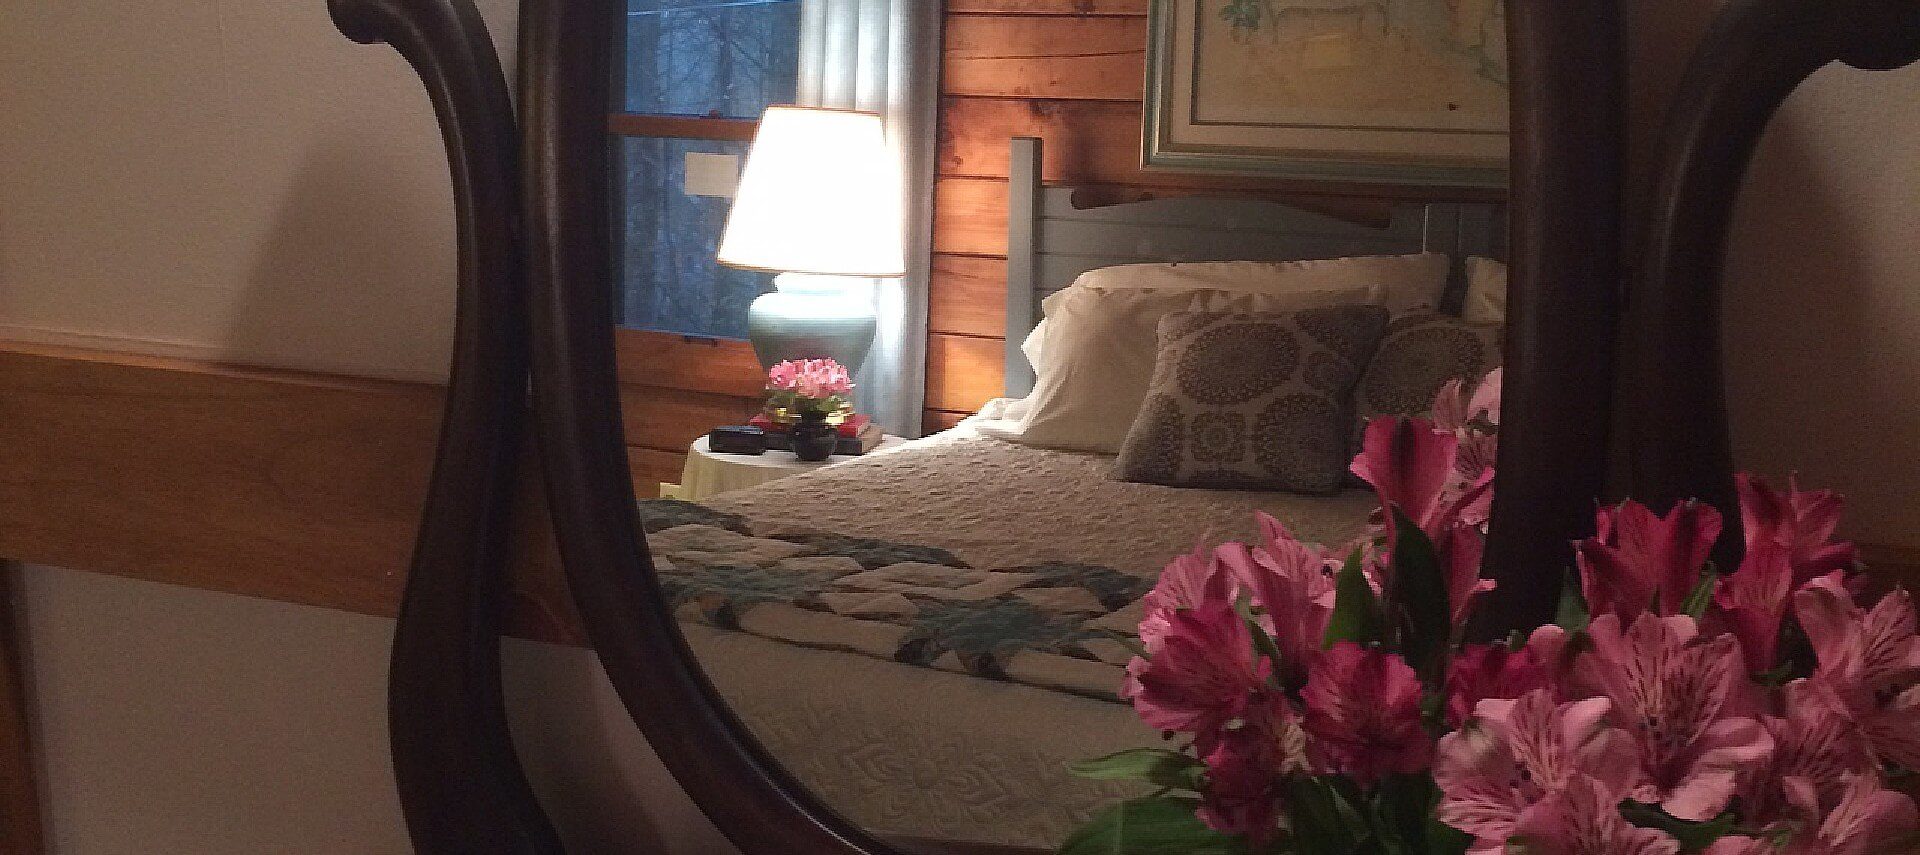 King bed with blue headboard and white quilt reflecting in a large oval antique mirror